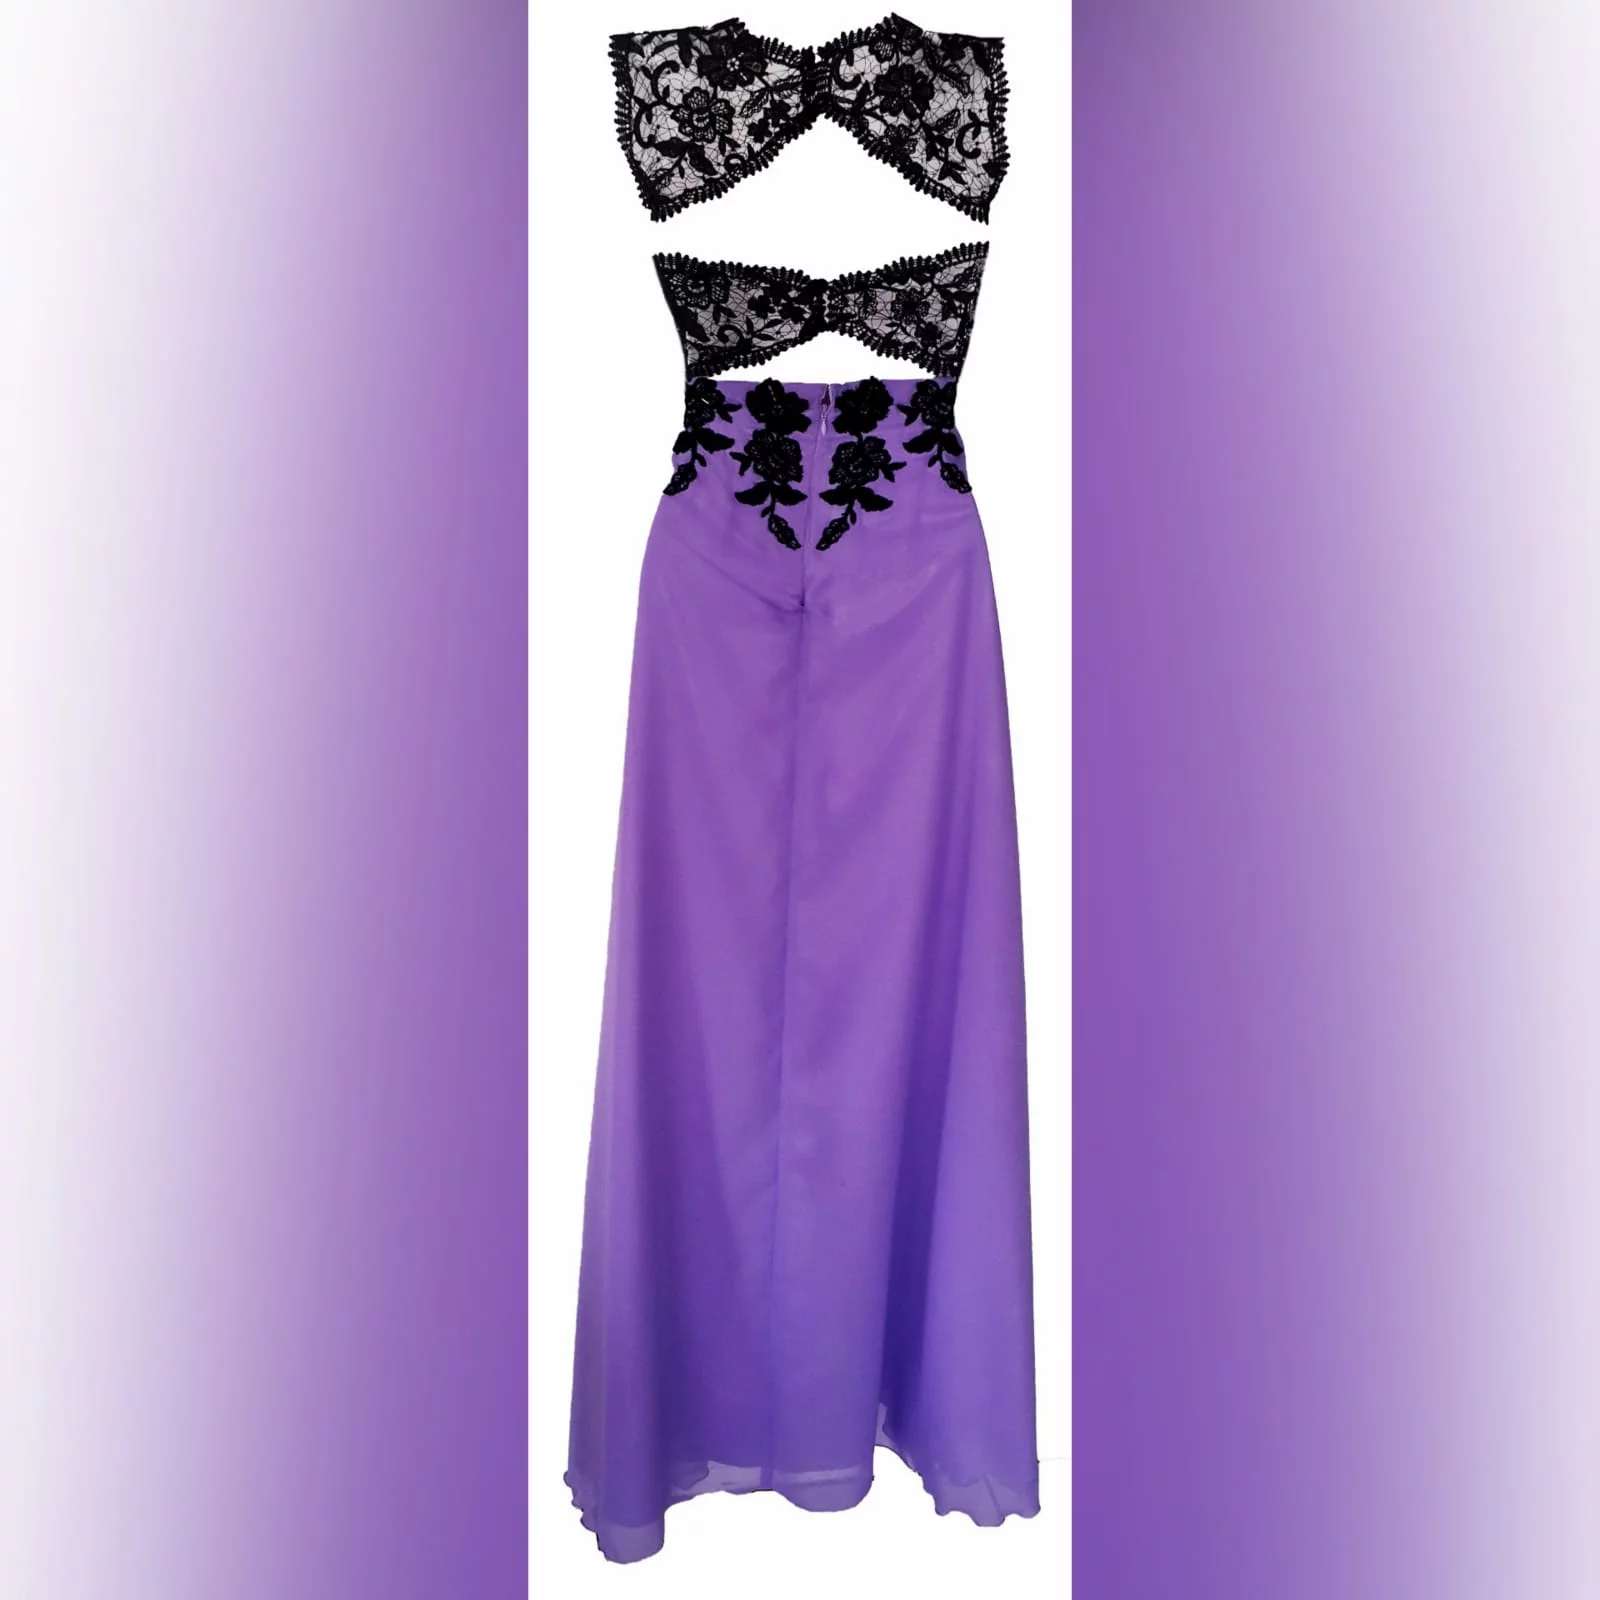 Lilac and black lace matric farewell dress 5 lilac and black lace matric farewell dress. Bodice with applique lace and a sweetheart neckline. With sheer lace shoulder straps and sheer lace on the back. Long and flowy matric farewell dress.